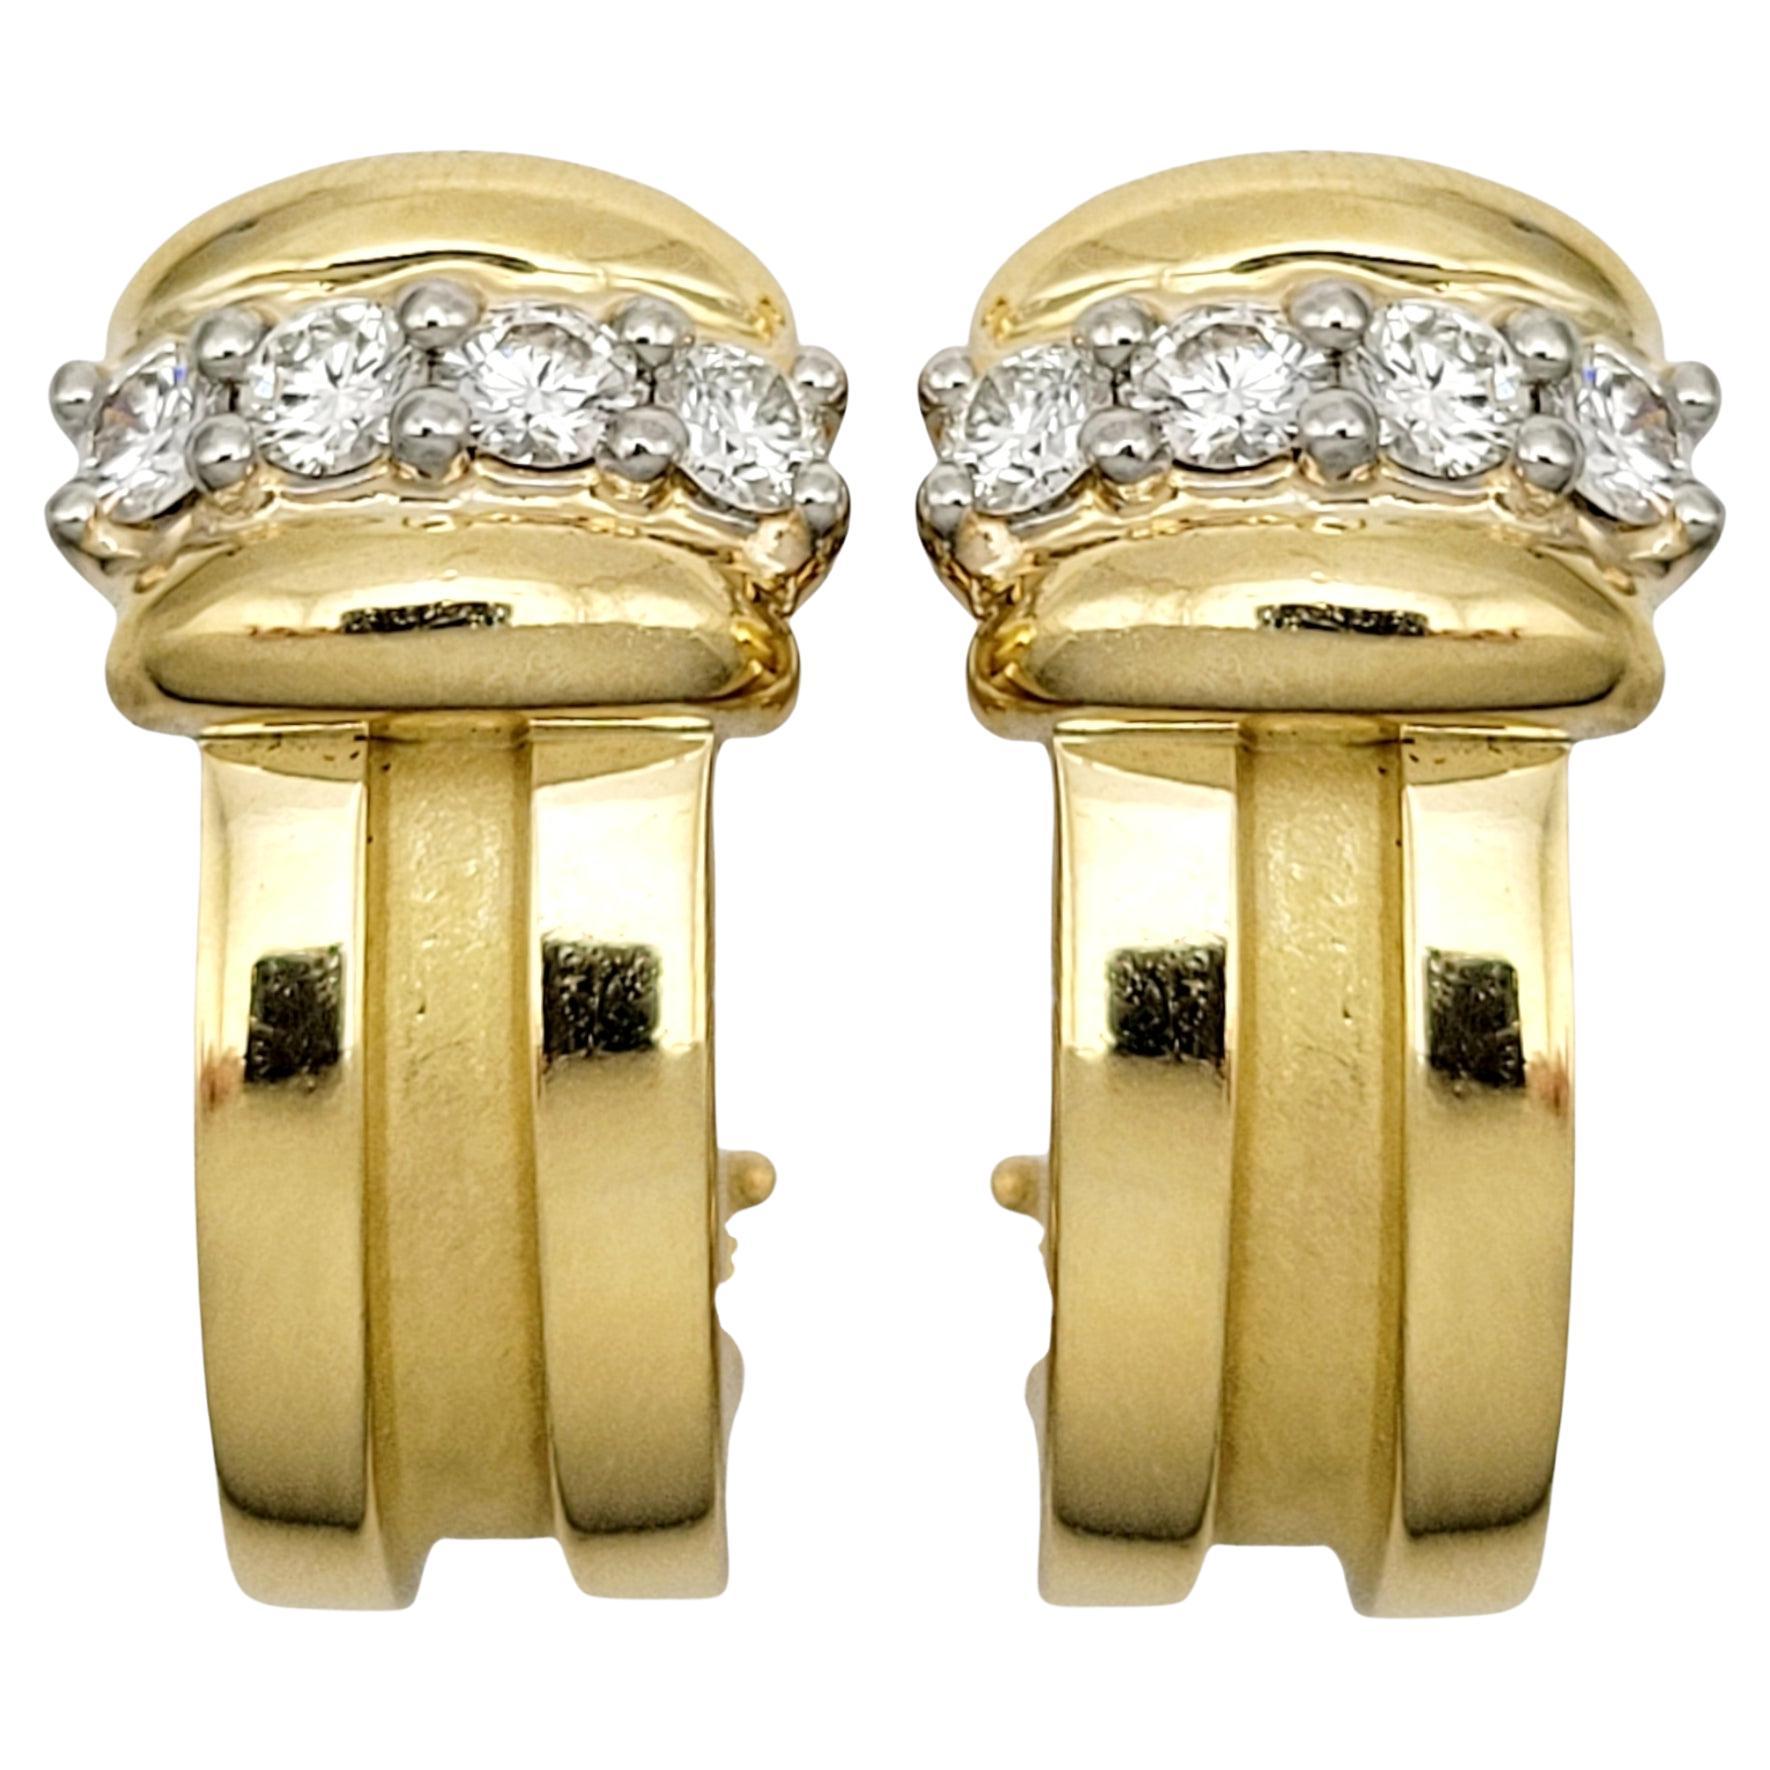 Vintage Tiffany & Co. 1995 "Atlas" 0.50 Carats Diamond Earrings in Yellow Gold For Sale